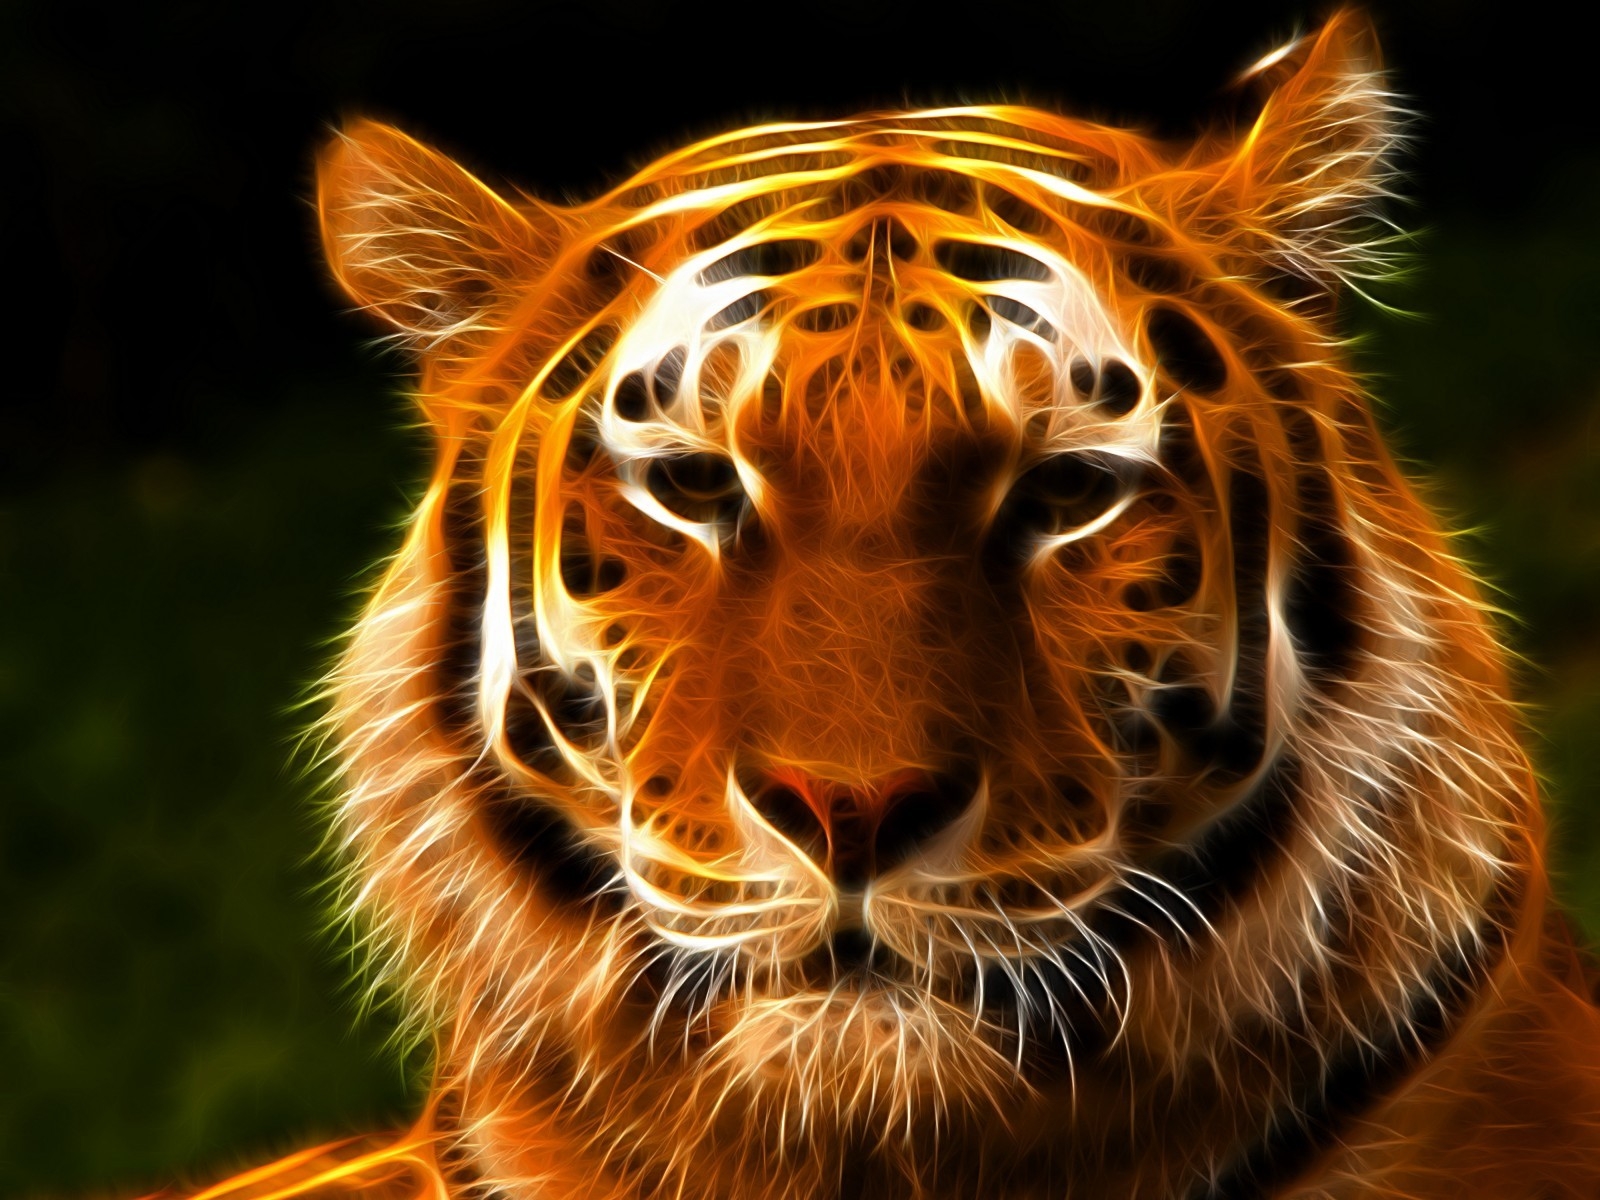 Tiger Face Art for 1600 x 1200 resolution